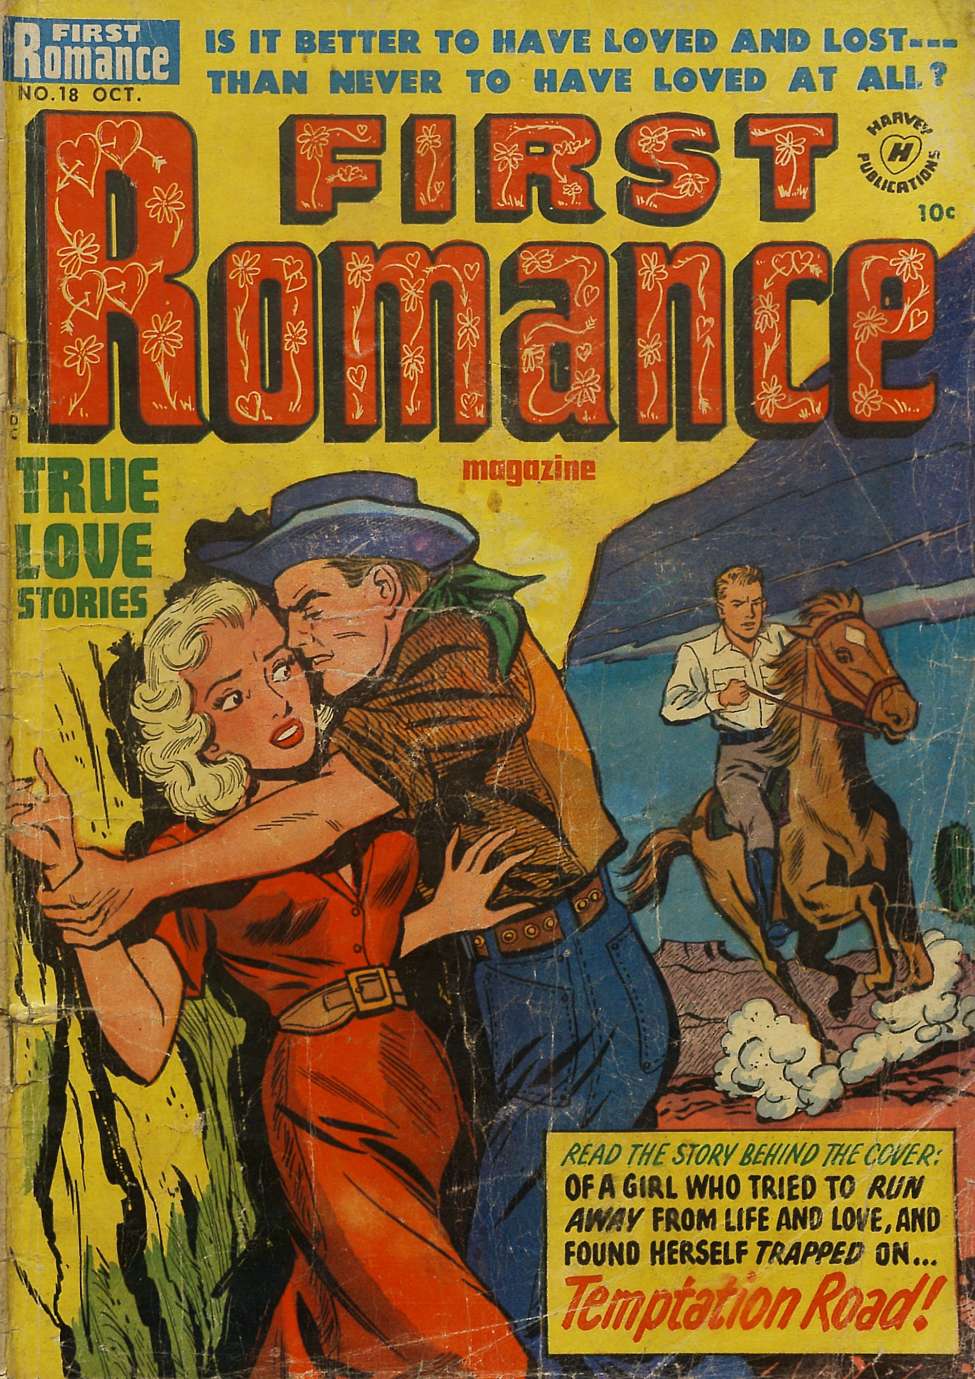 Book Cover For First Romance Magazine 18